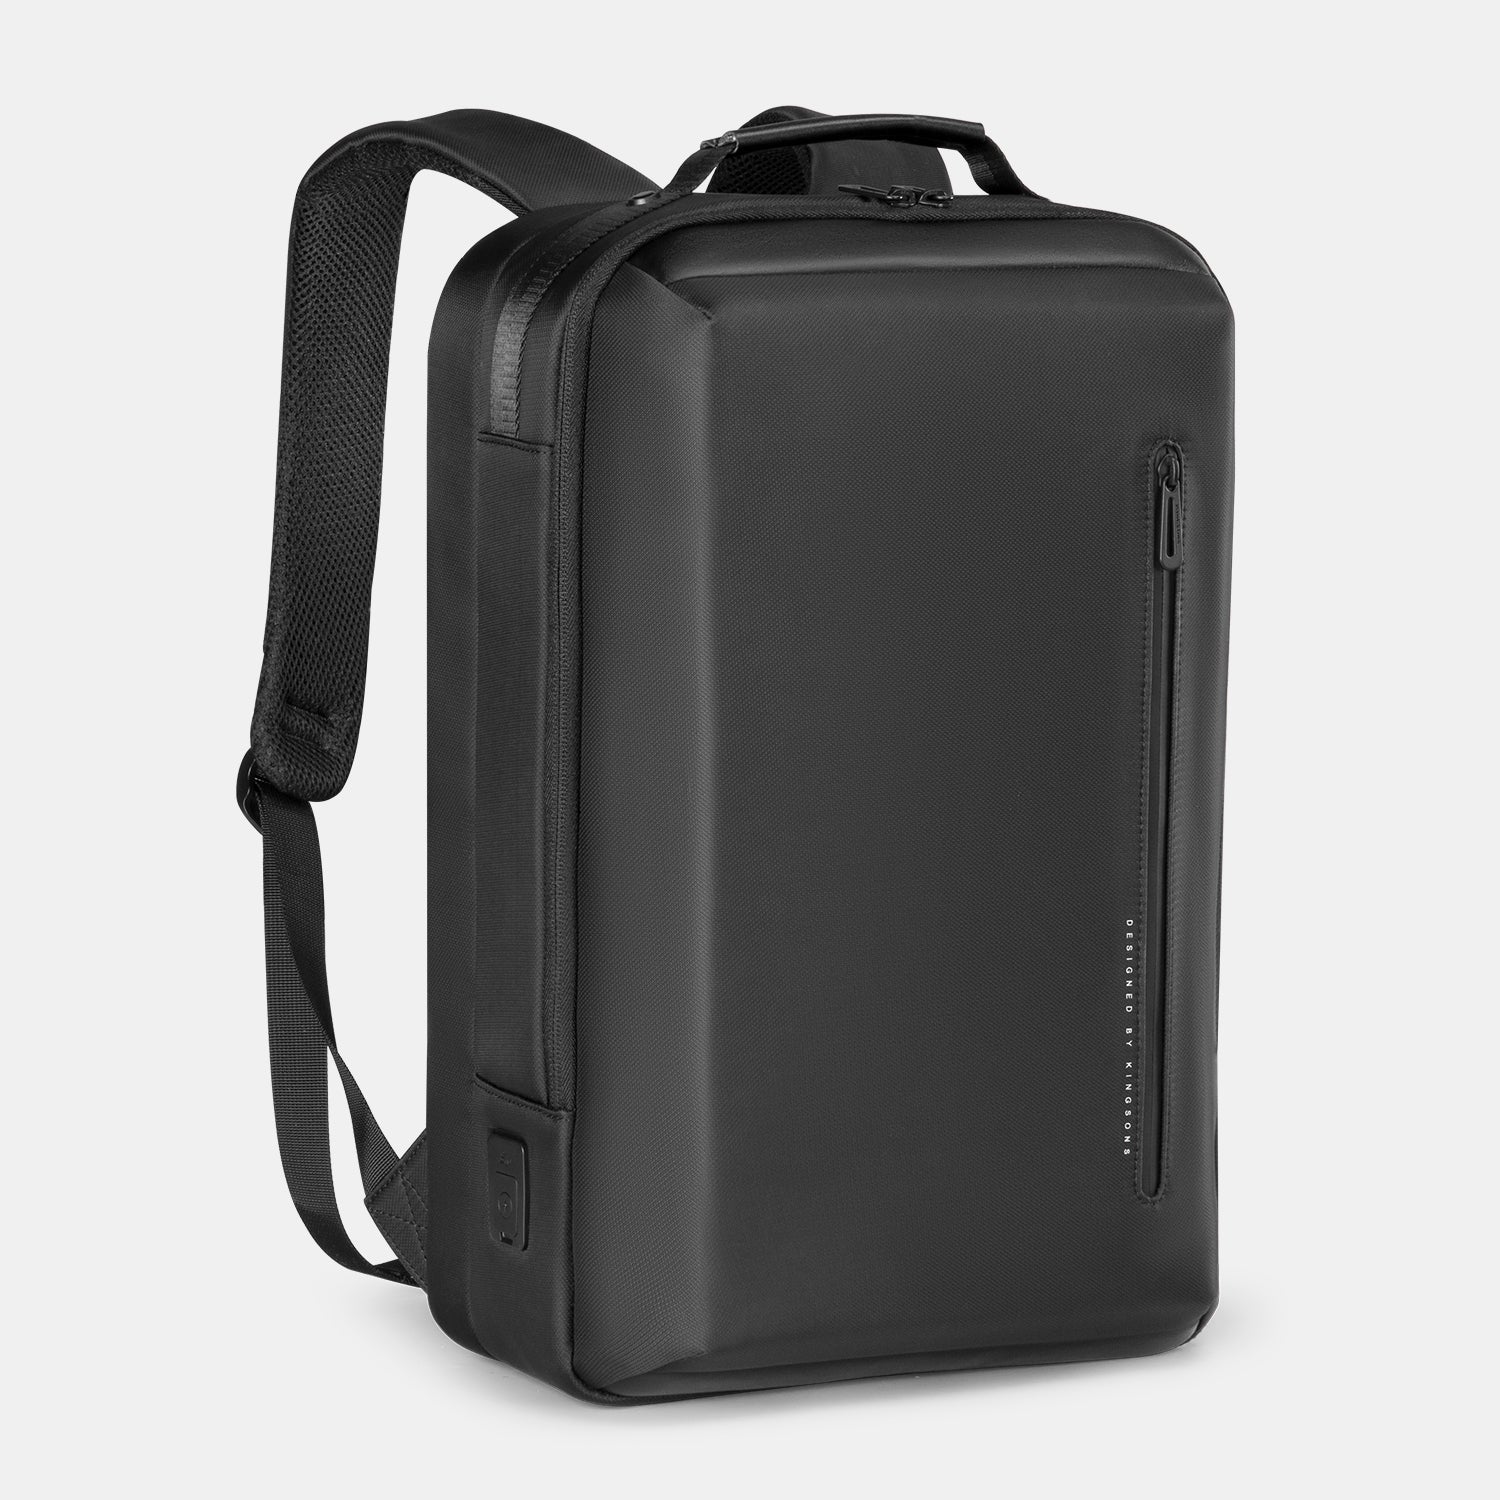 Comity - The Kingsons Commuter Backpack